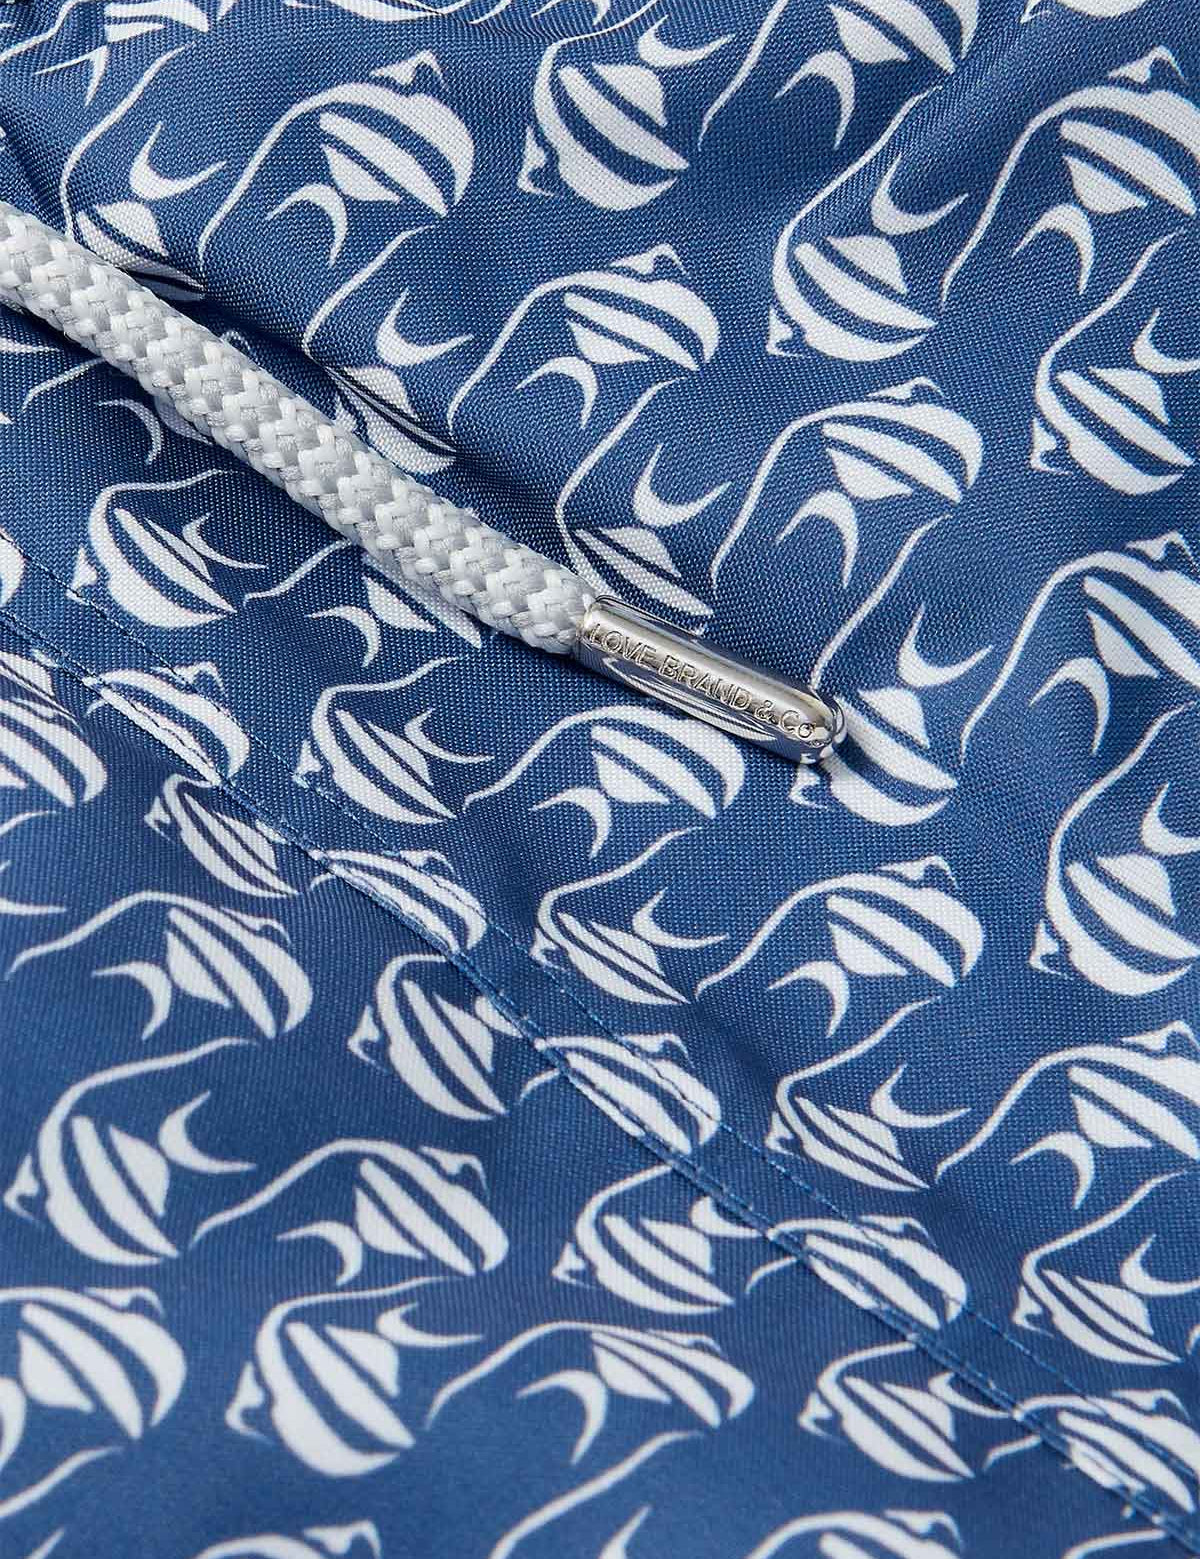 Go With The Flow mens swim shorts detail. The design features a print of white Moorish Idol Fish on a blue background.